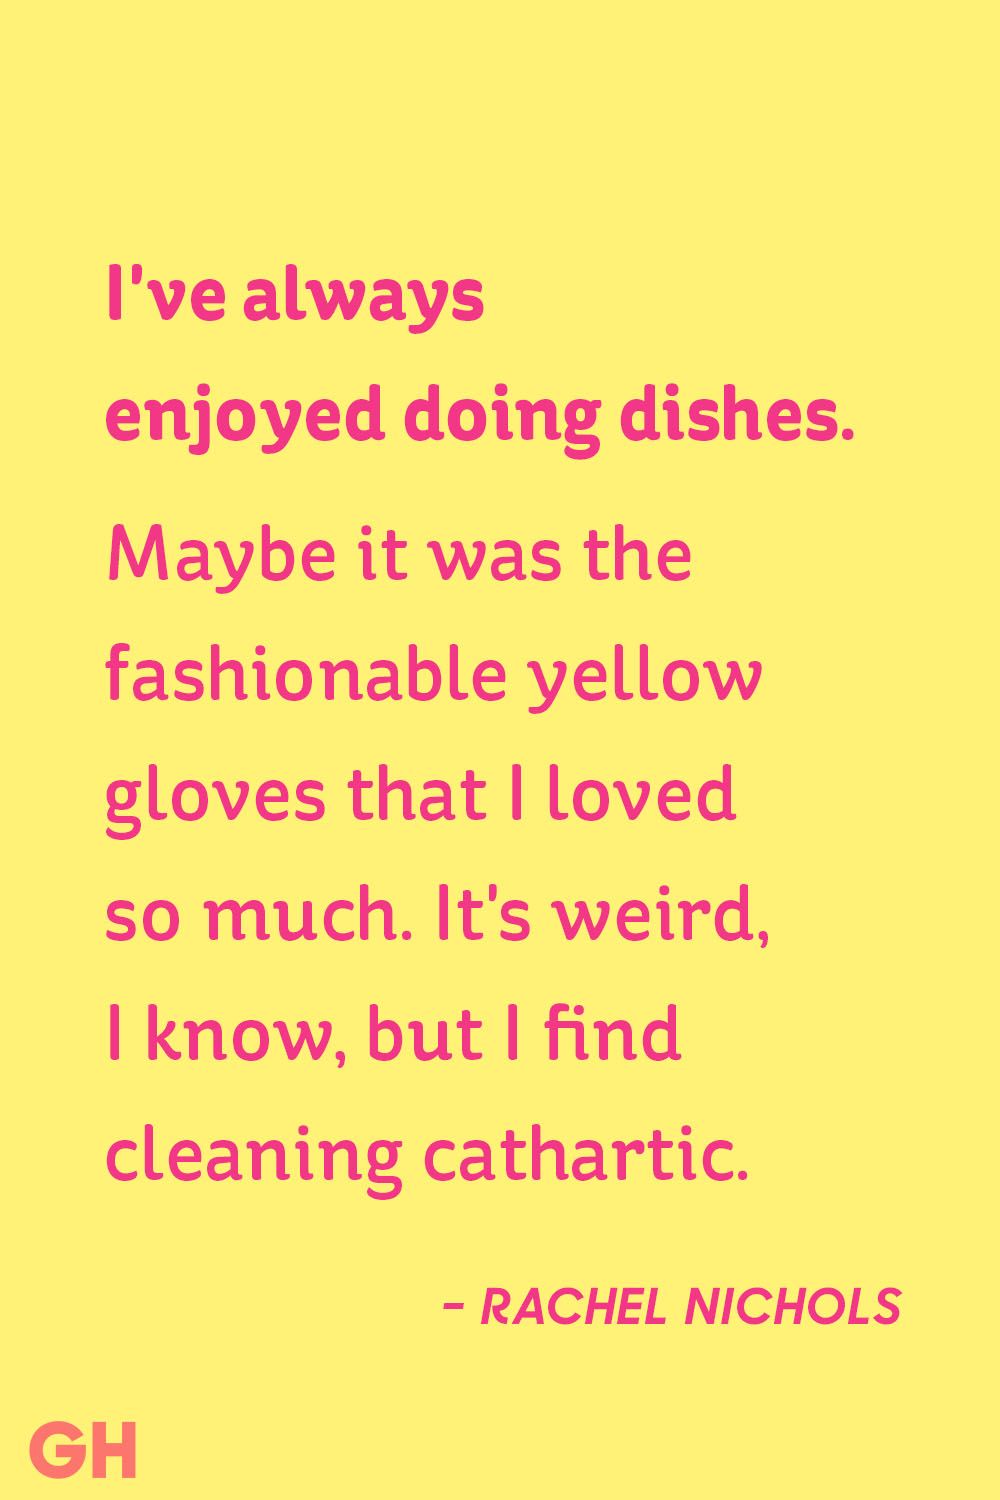 15 Funny Cleaning Quotes - Famous Quotes About a Clean House